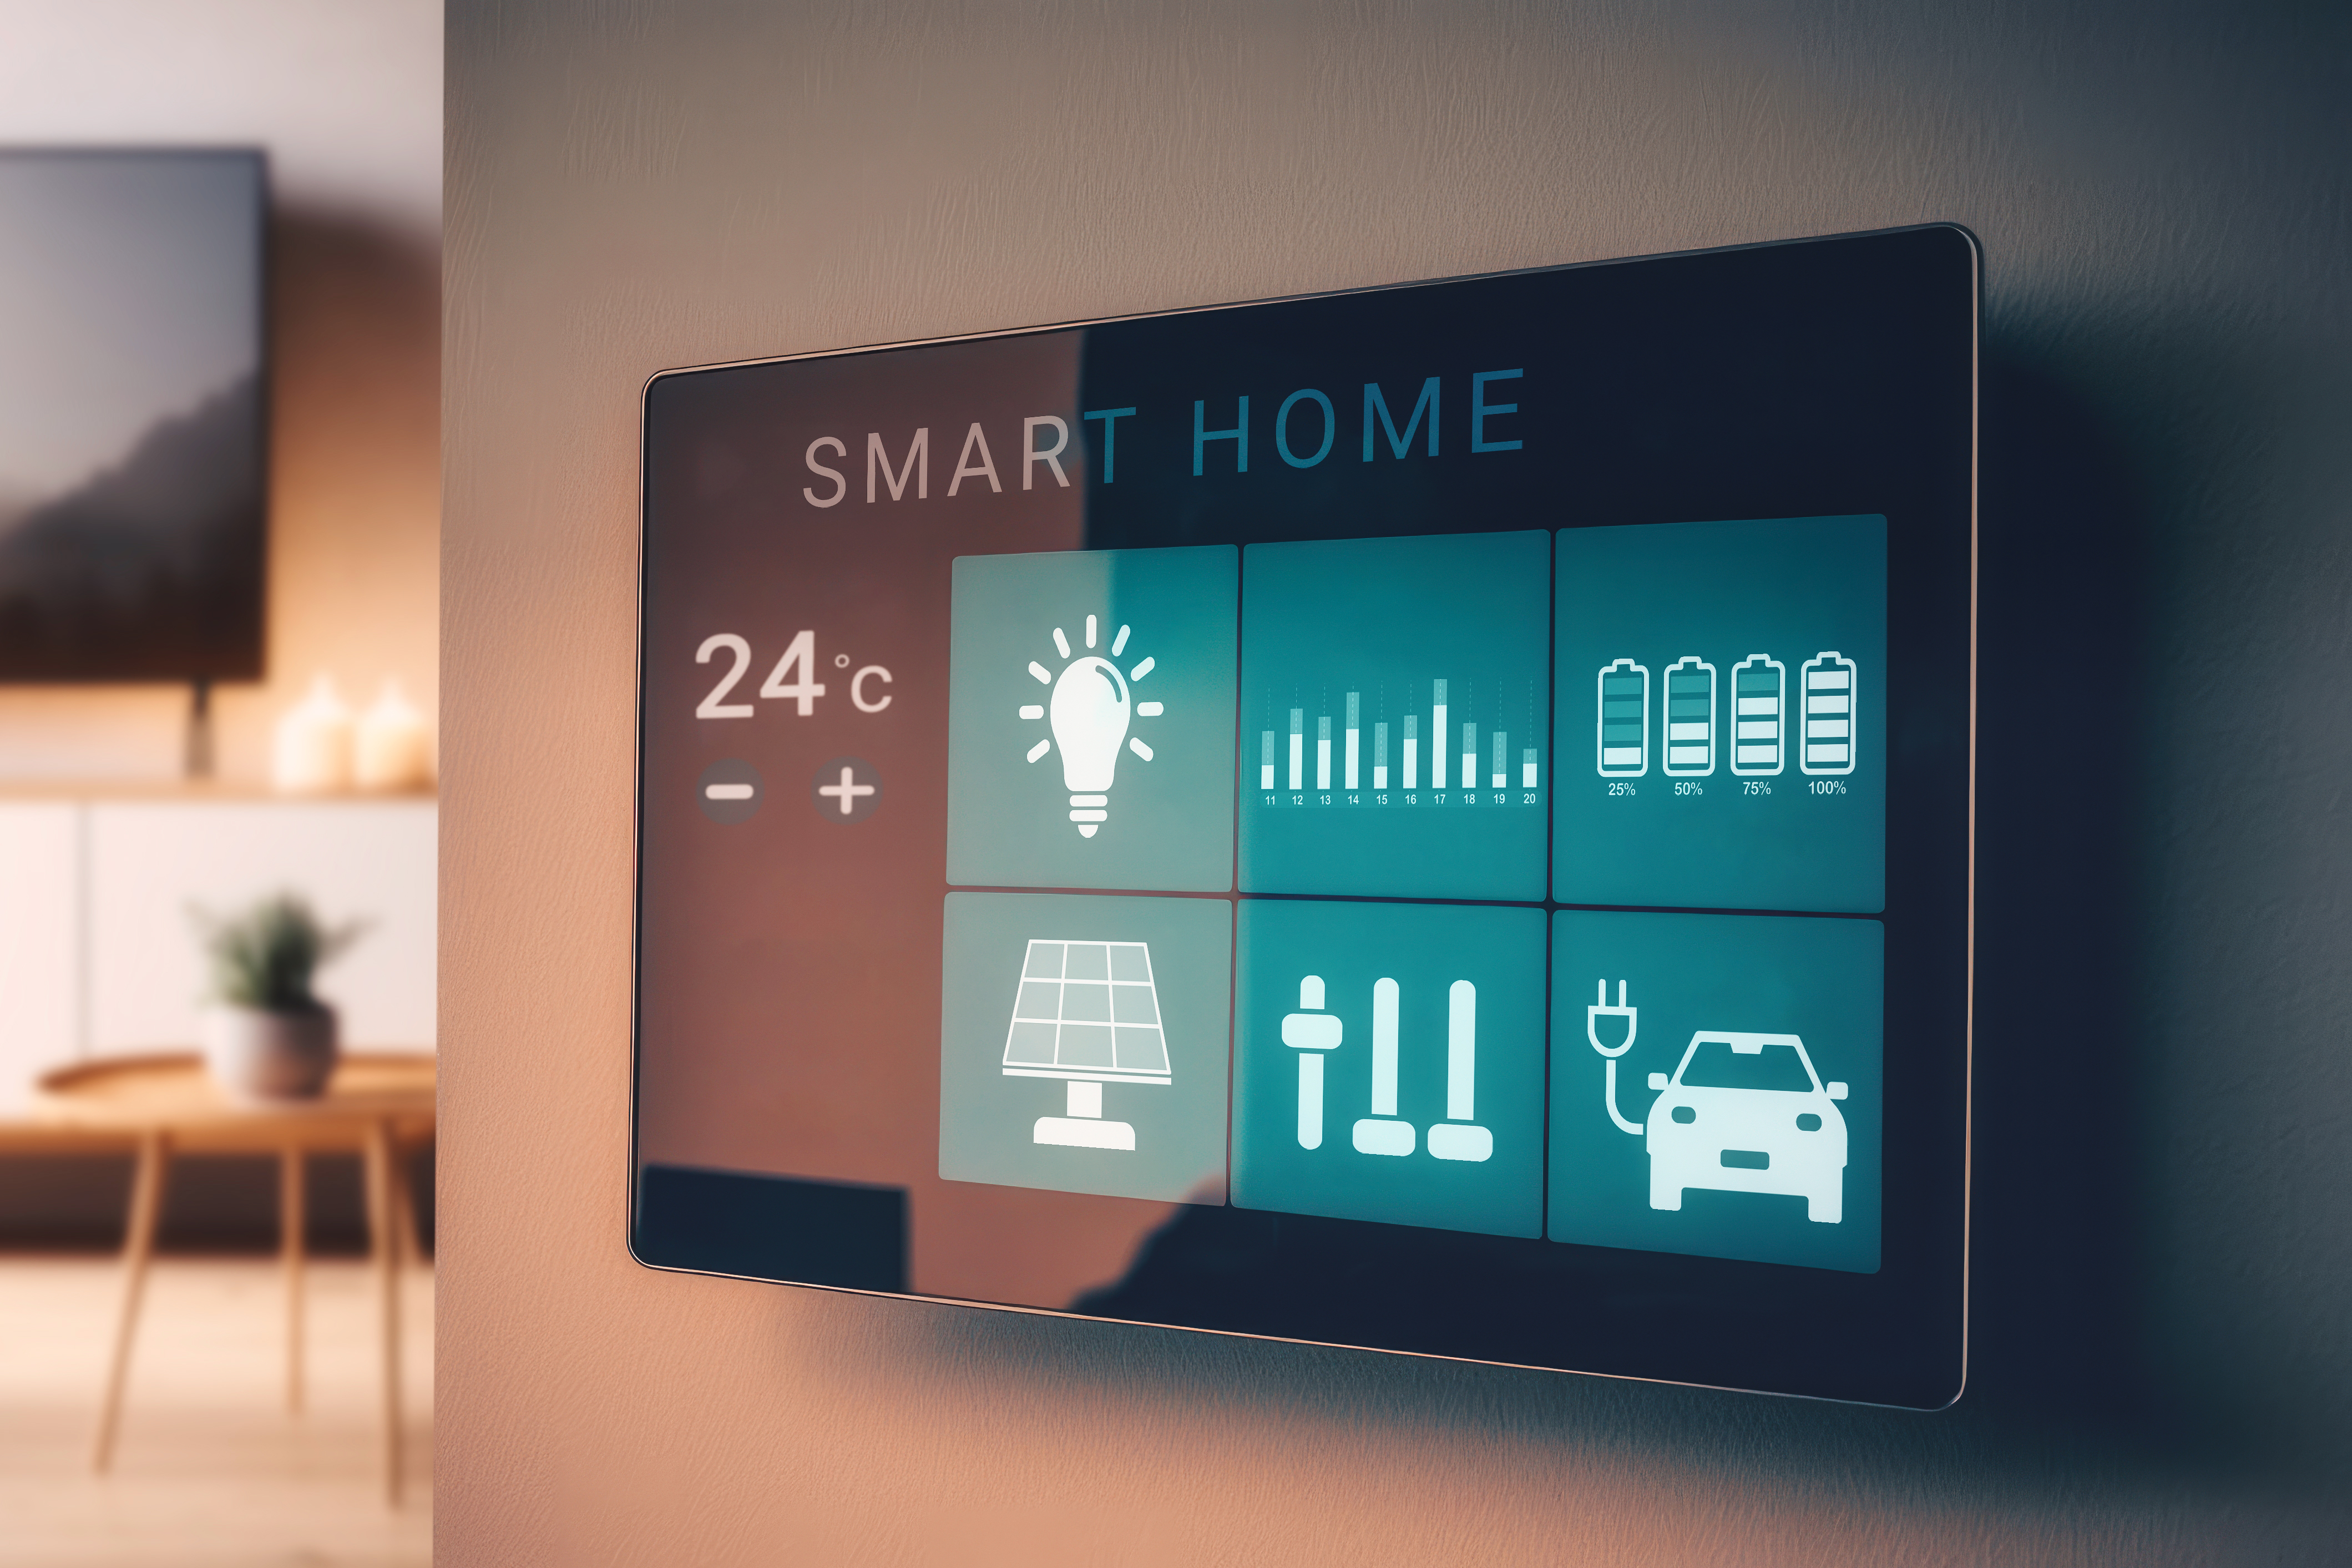 Smart Monitored Home Security Systems for Your Smart Home